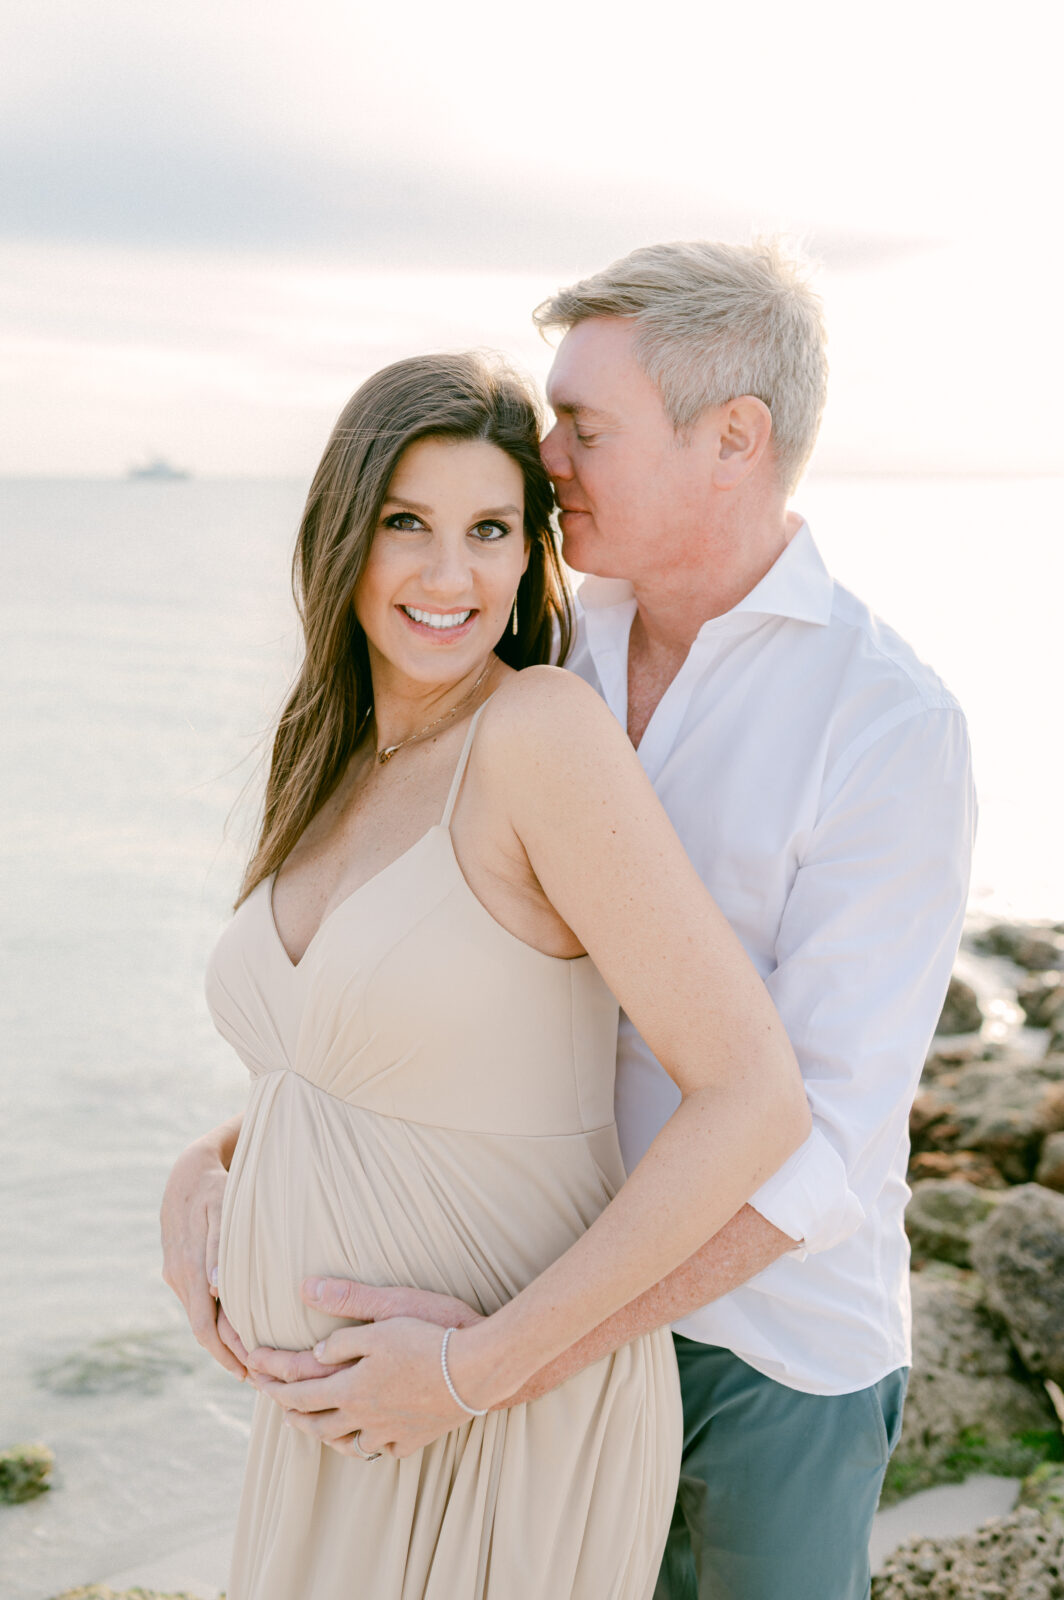 Parents to be on the beach during pregnancy photoshoot